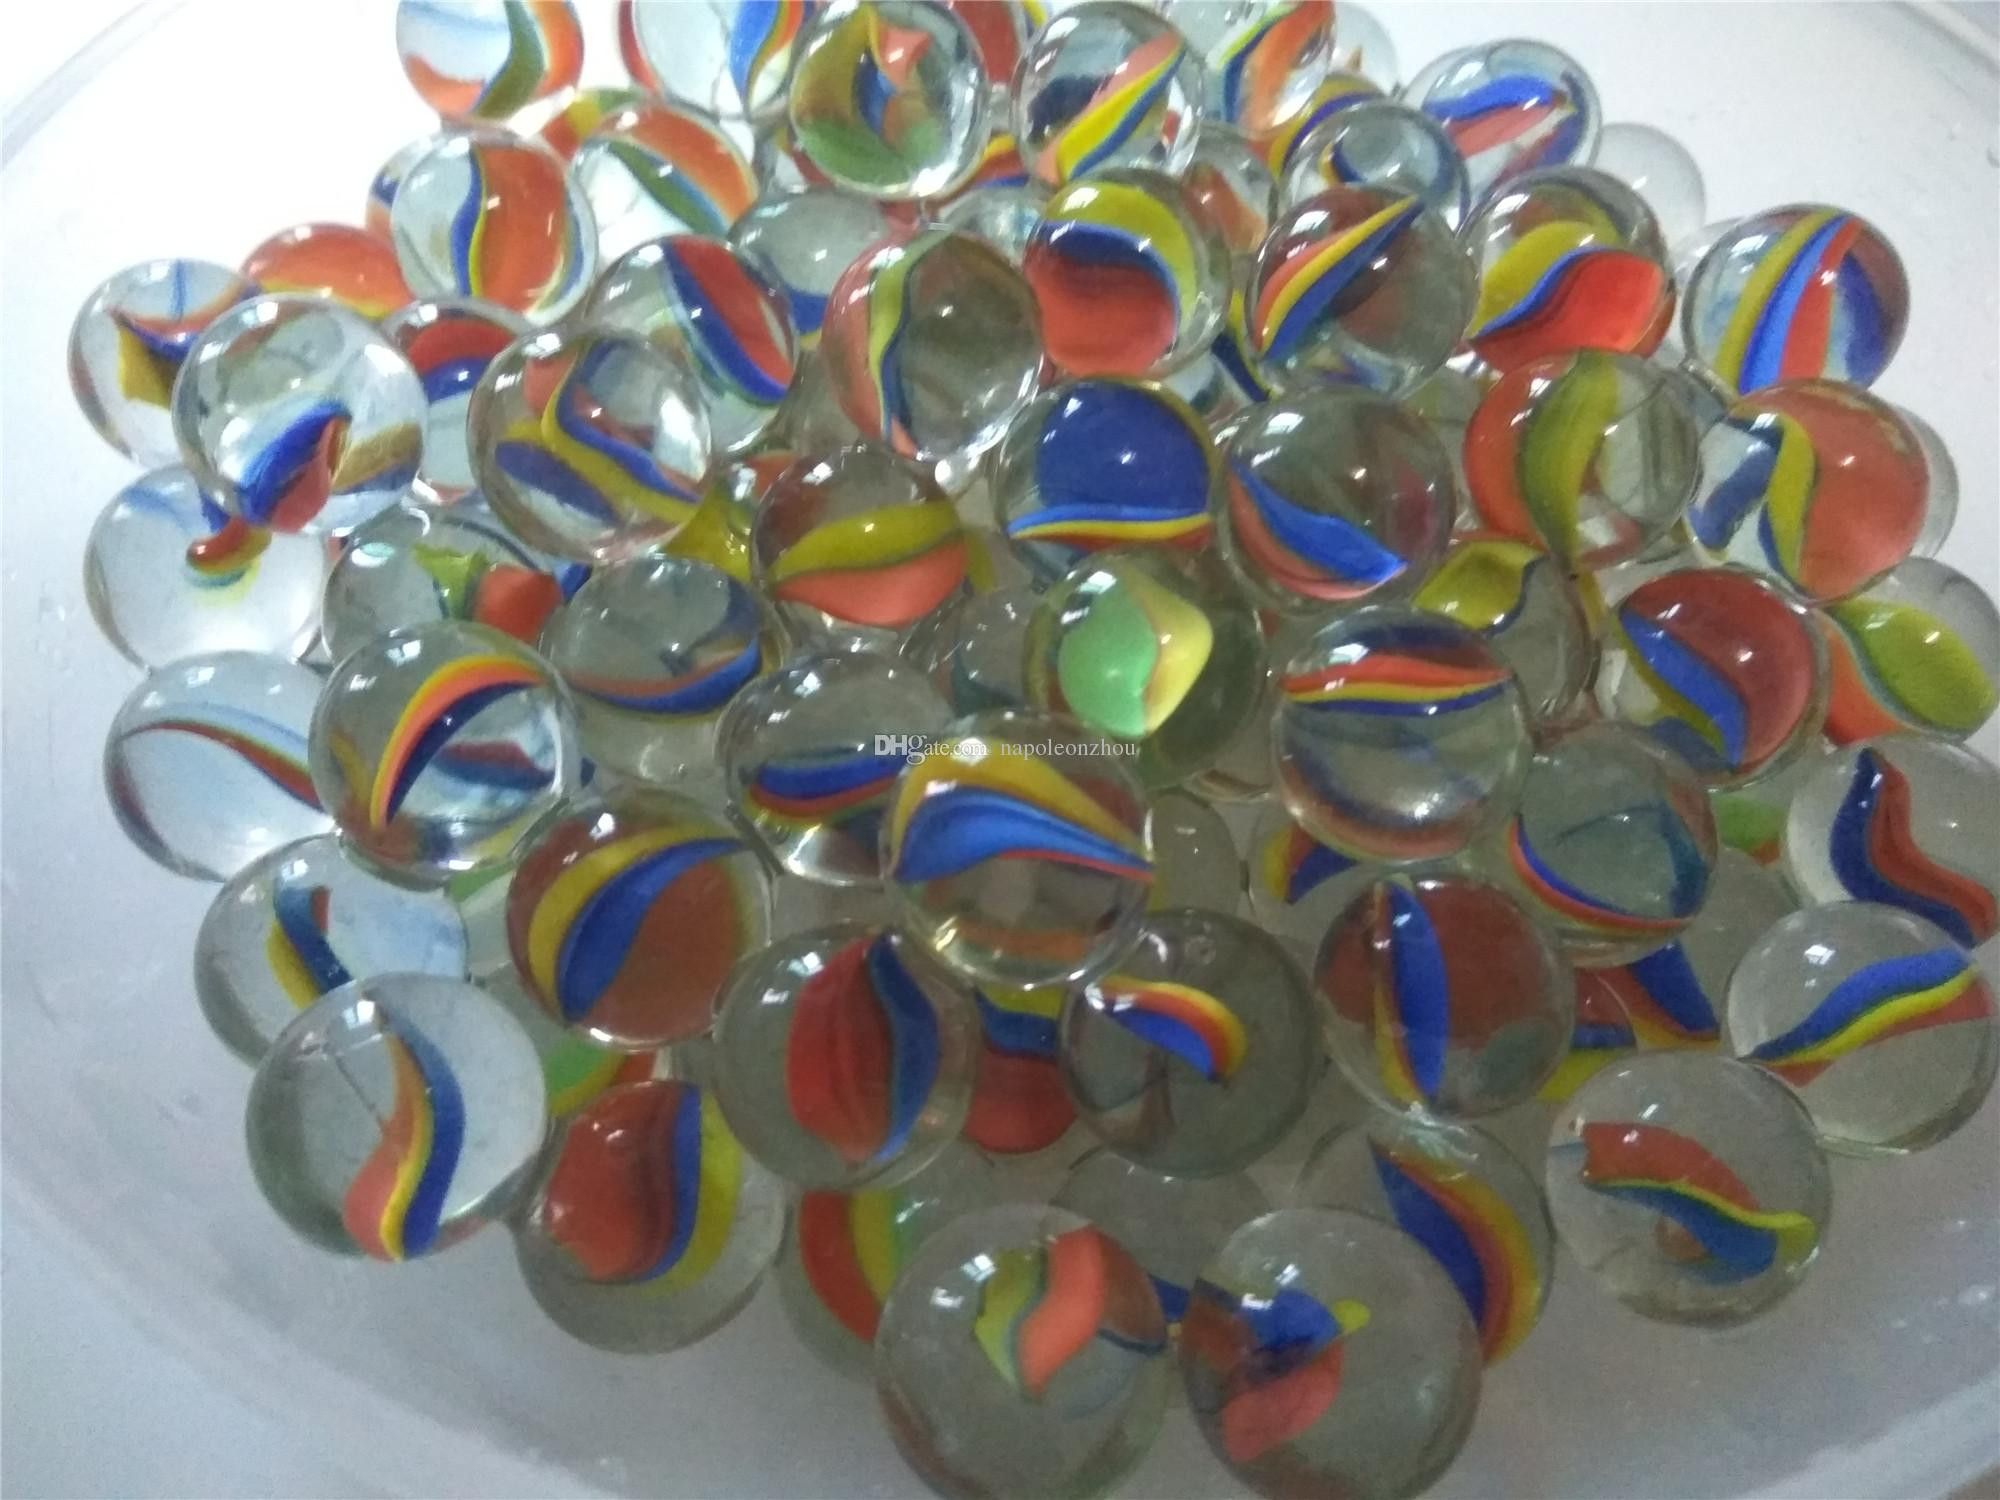 colored glass beads for vases of petals 1 6 cm fish tank pachinko glass ball gardening bonsai with regard to petals 1 6 cm fish tank pachinko glass ball gardening bonsai decoration stone 16 mm checkers cat toy vase filler glass stone pachinko ball glass balls